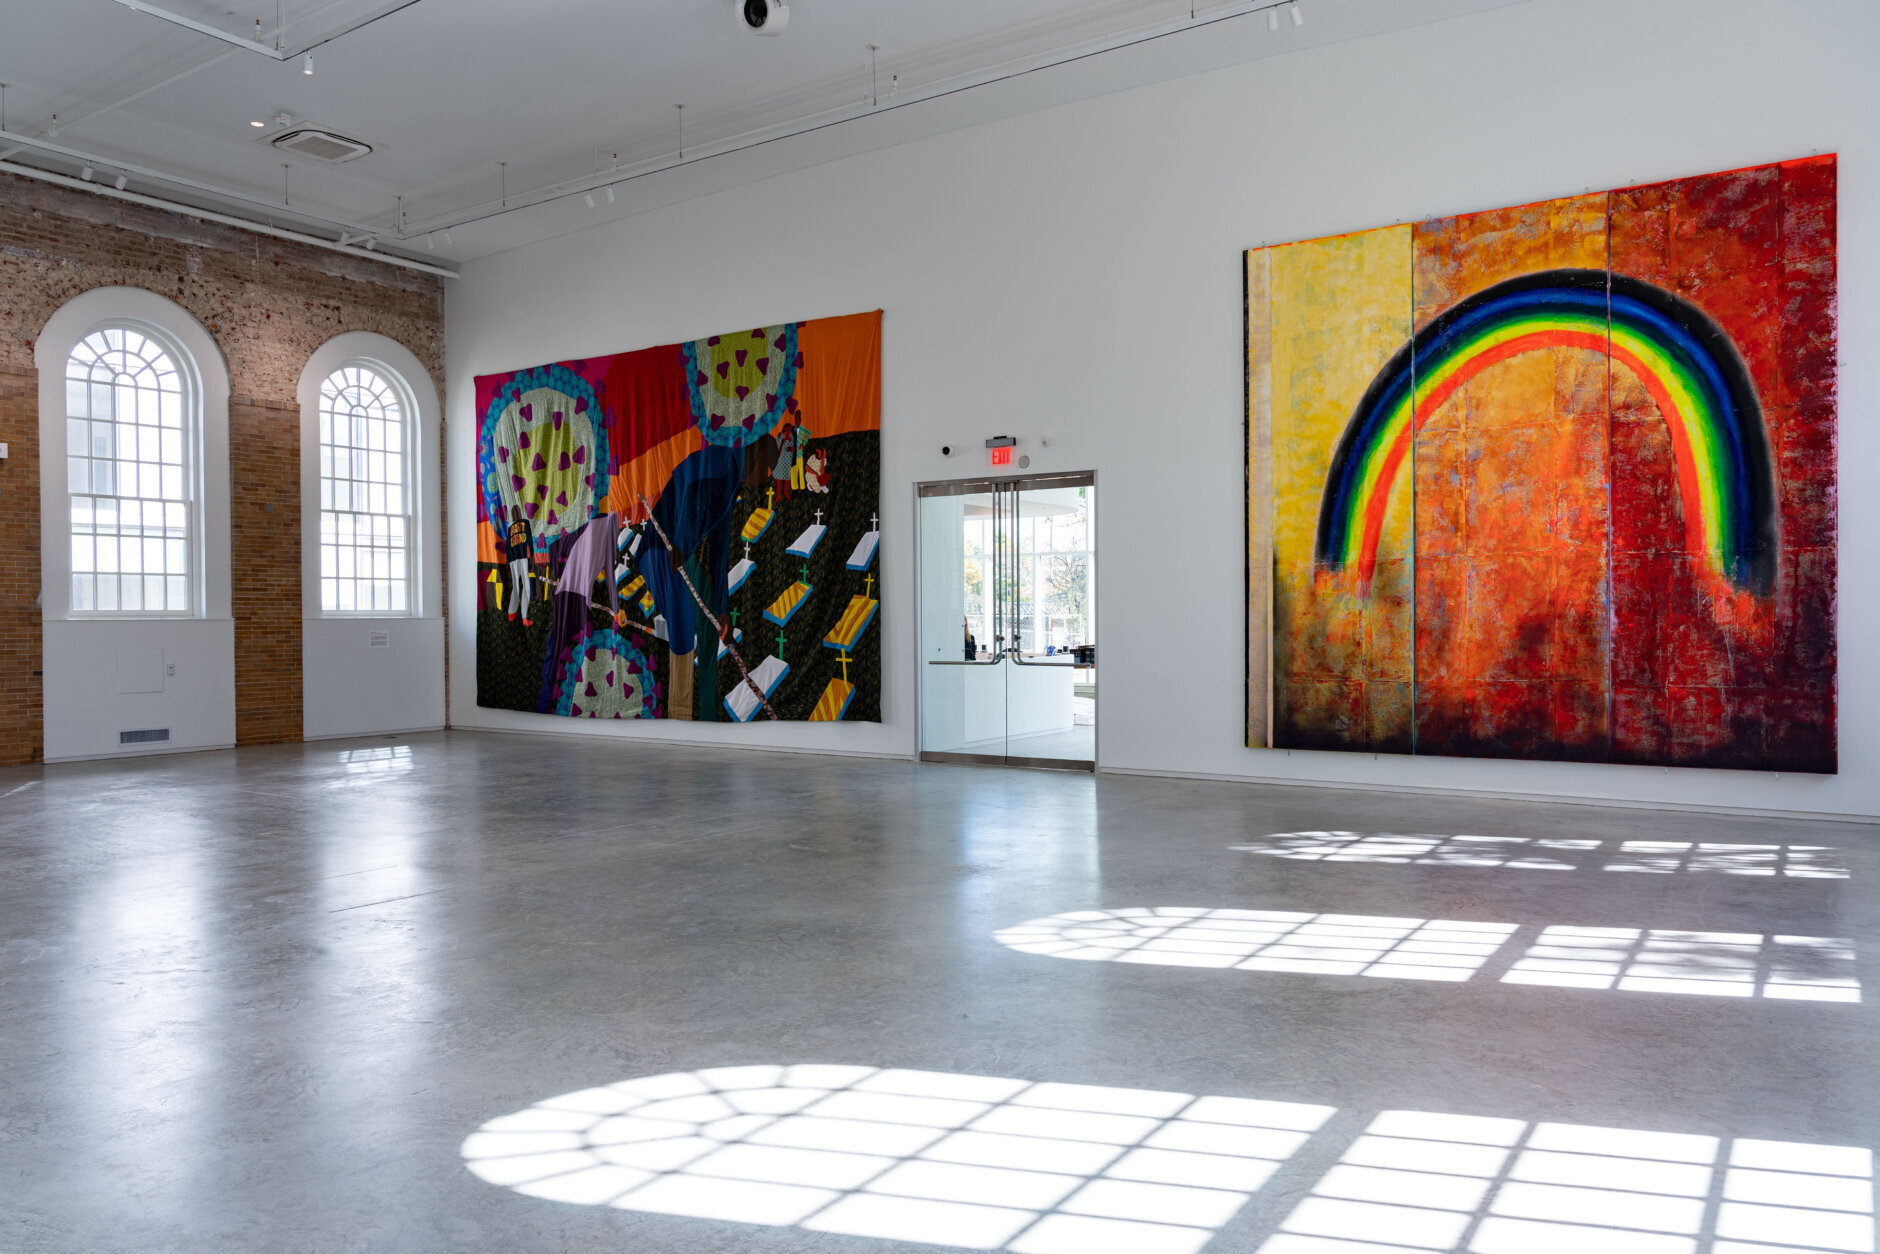 <p>Caitlin Berry, director of Rubell Museum DC, said they are excited to welcome the community inside.</p>
<p>“We hope to offer a place of respite and conversation and community-building among everyone in D.C. We&#8217;re free for D.C. residents, specifically the Southwest community in Ward 6,&#8221; Berry said.</p>
